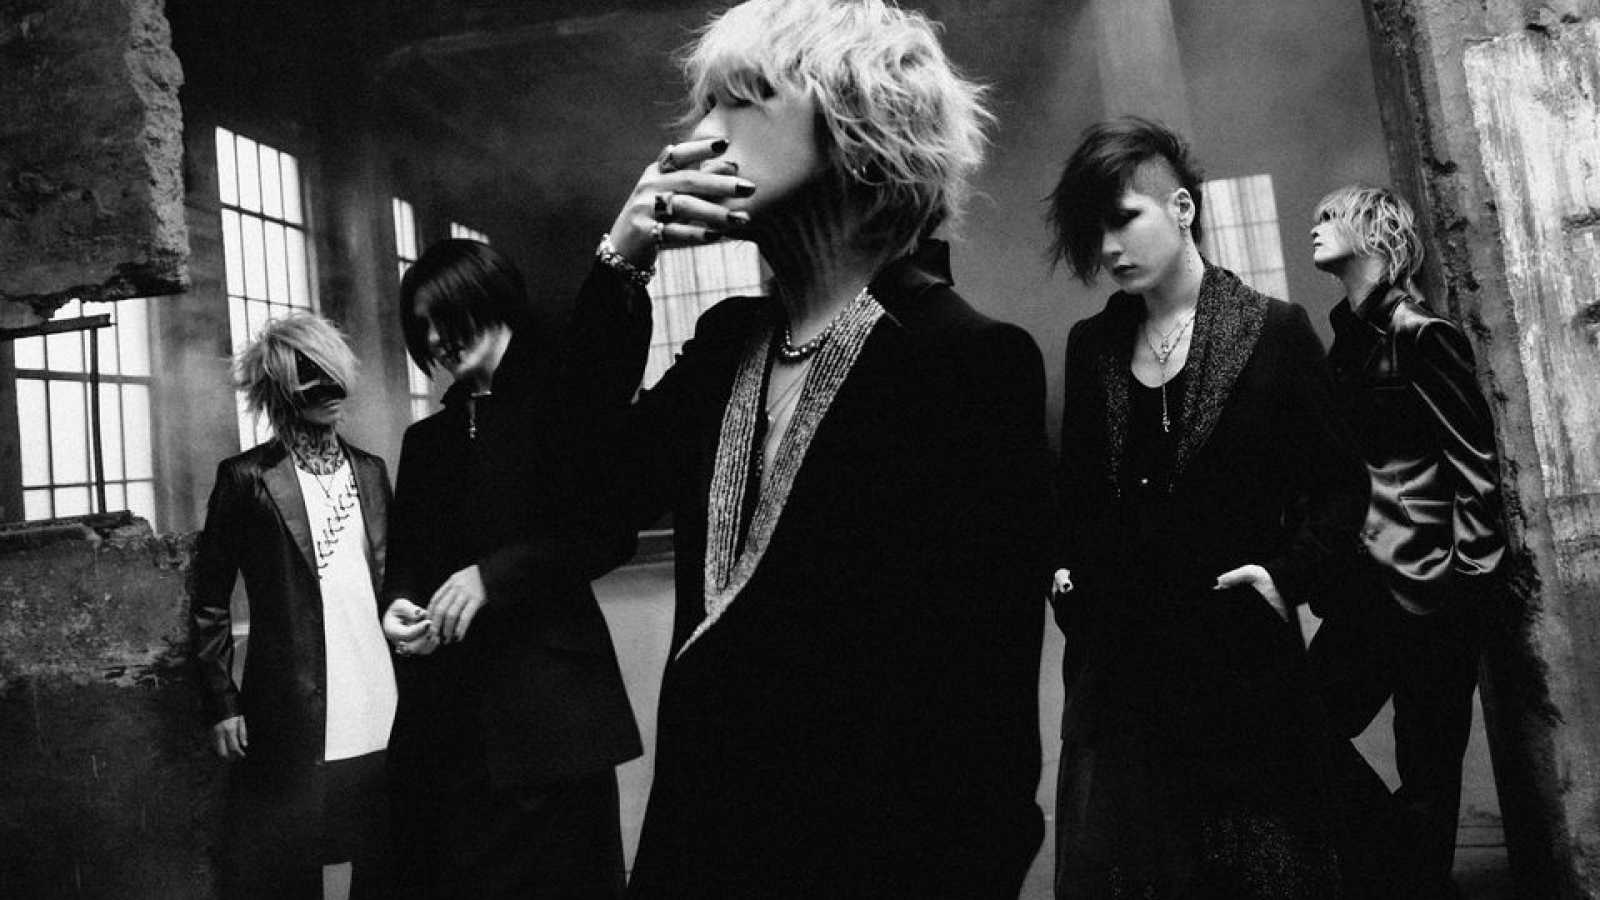 Nouvelles sorties de the GazettE © HERESY Inc. All rights reserved.